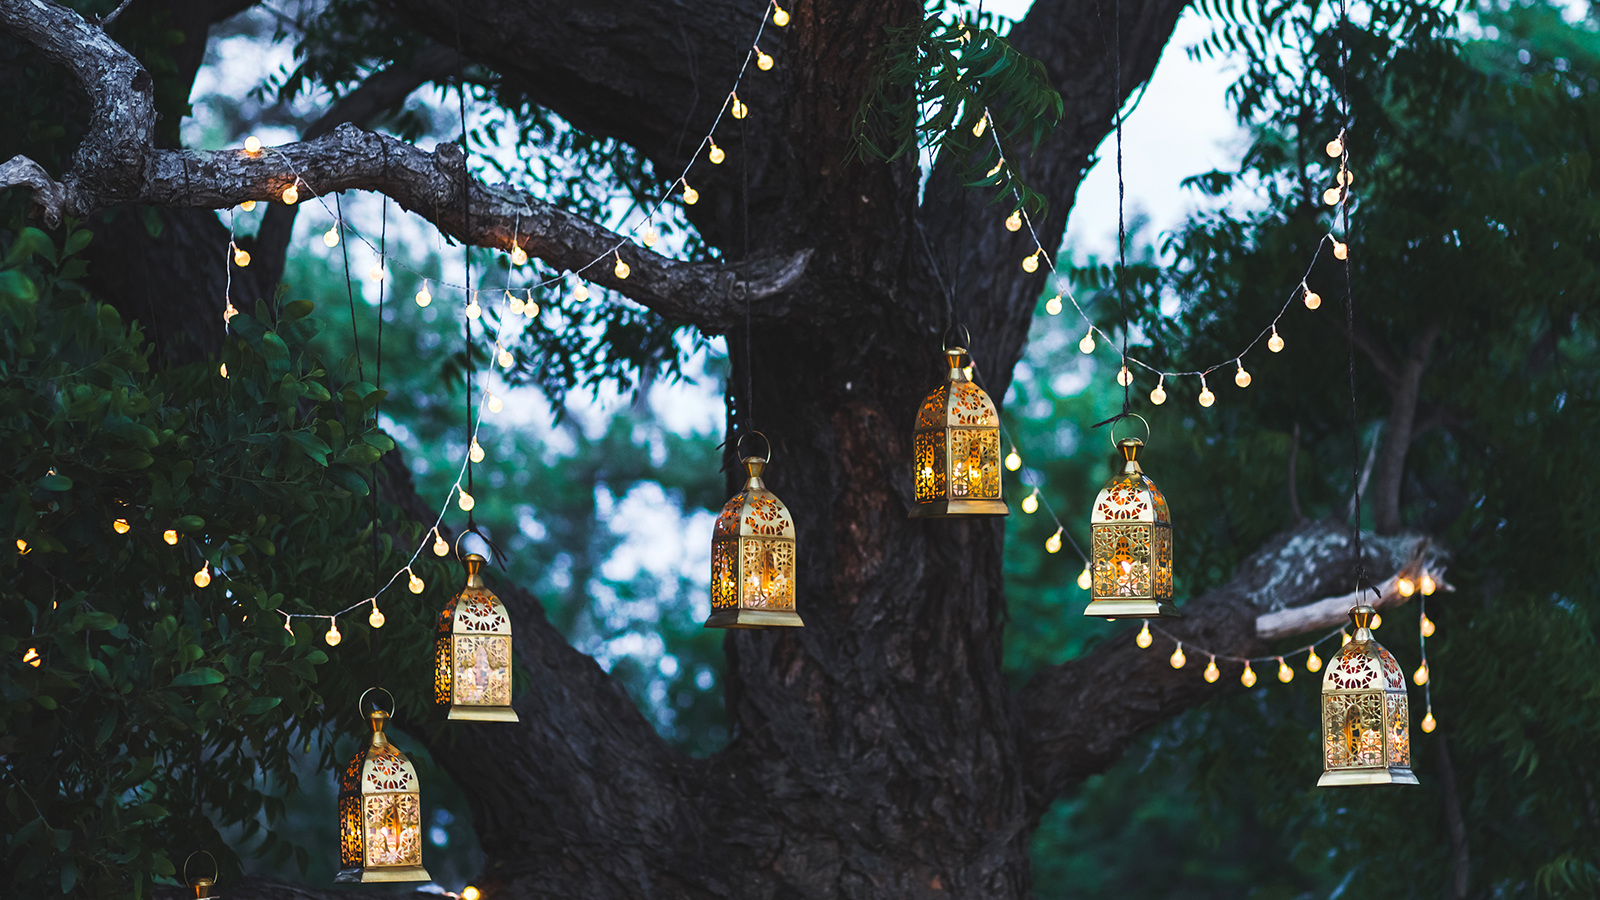 Night wedding ceremony with a lot of candles and vintage lamps on big tree